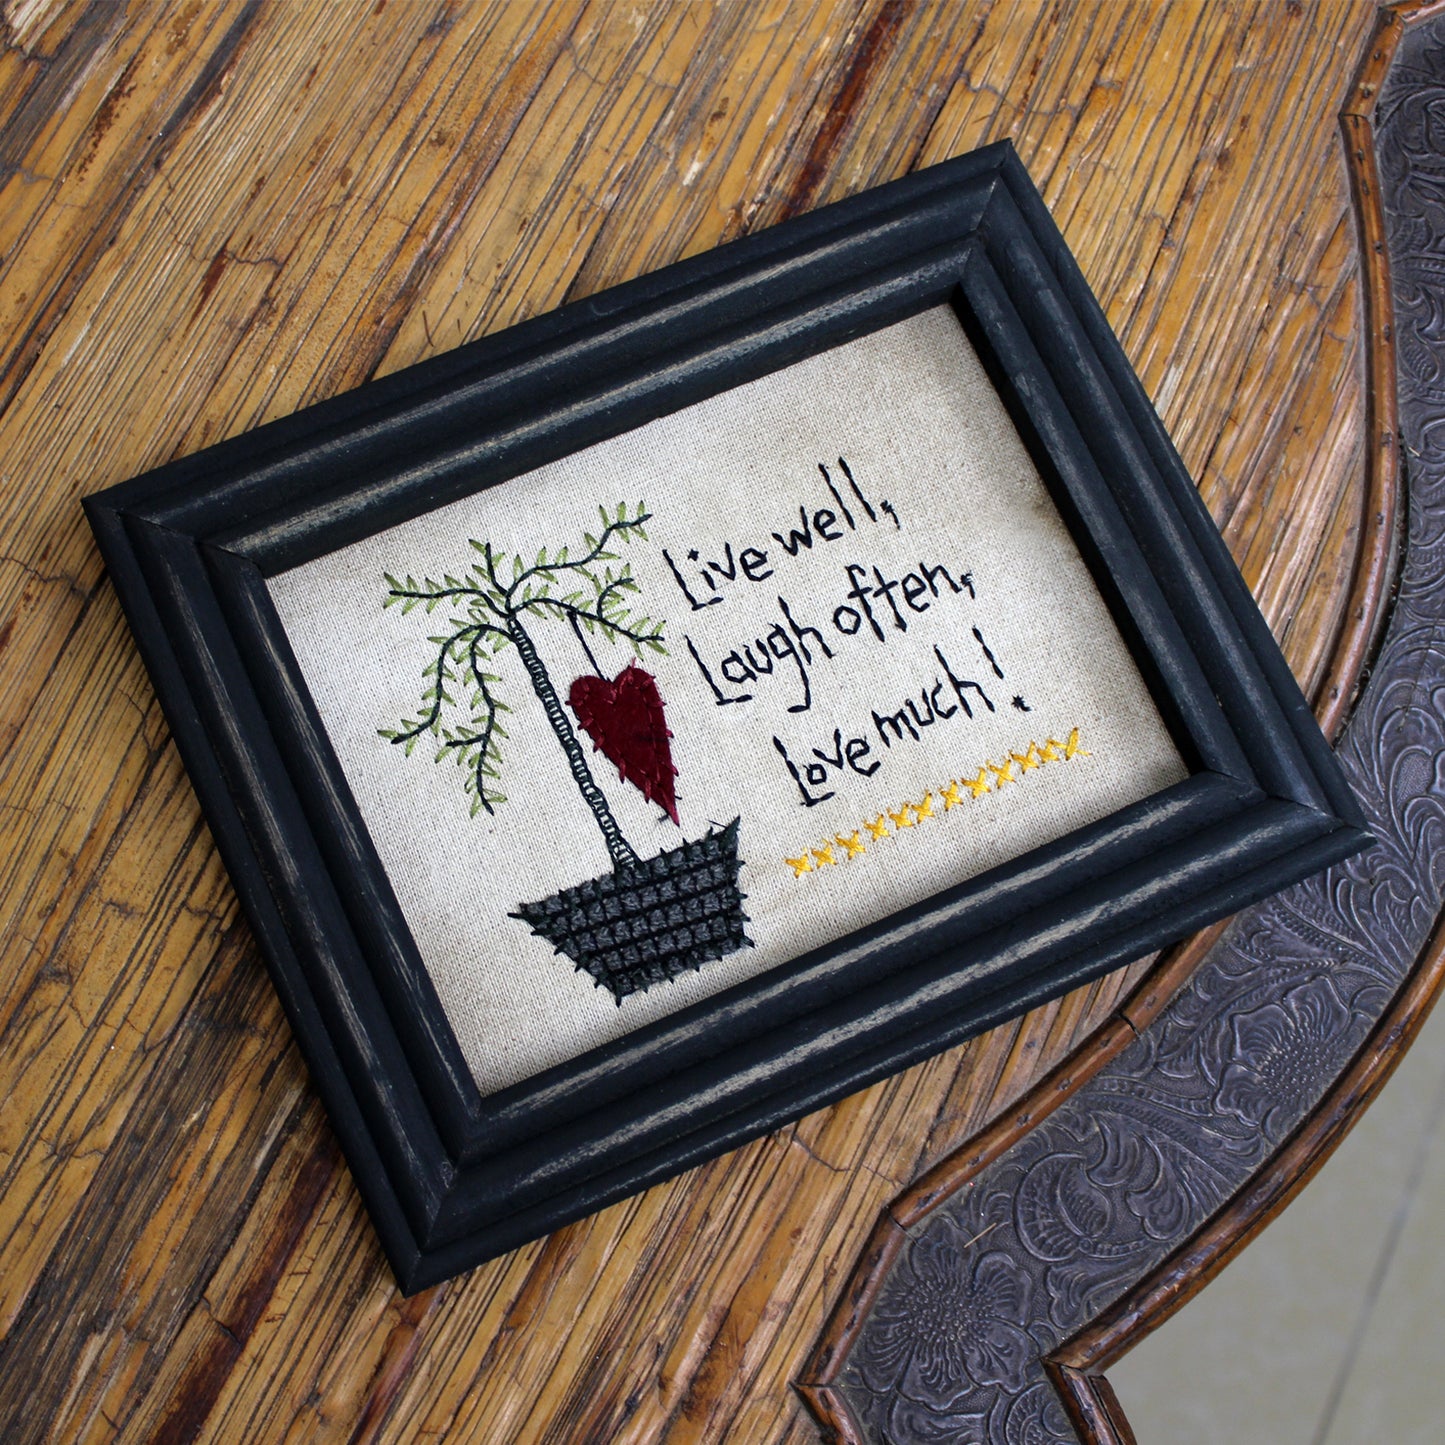 CVHOMEDECO. Primitives Vintage Live Well, Laugh Often, Love Much! Stitchery Frame Wall Hanging Decoration Art, 8.75 x 6.75 Inch